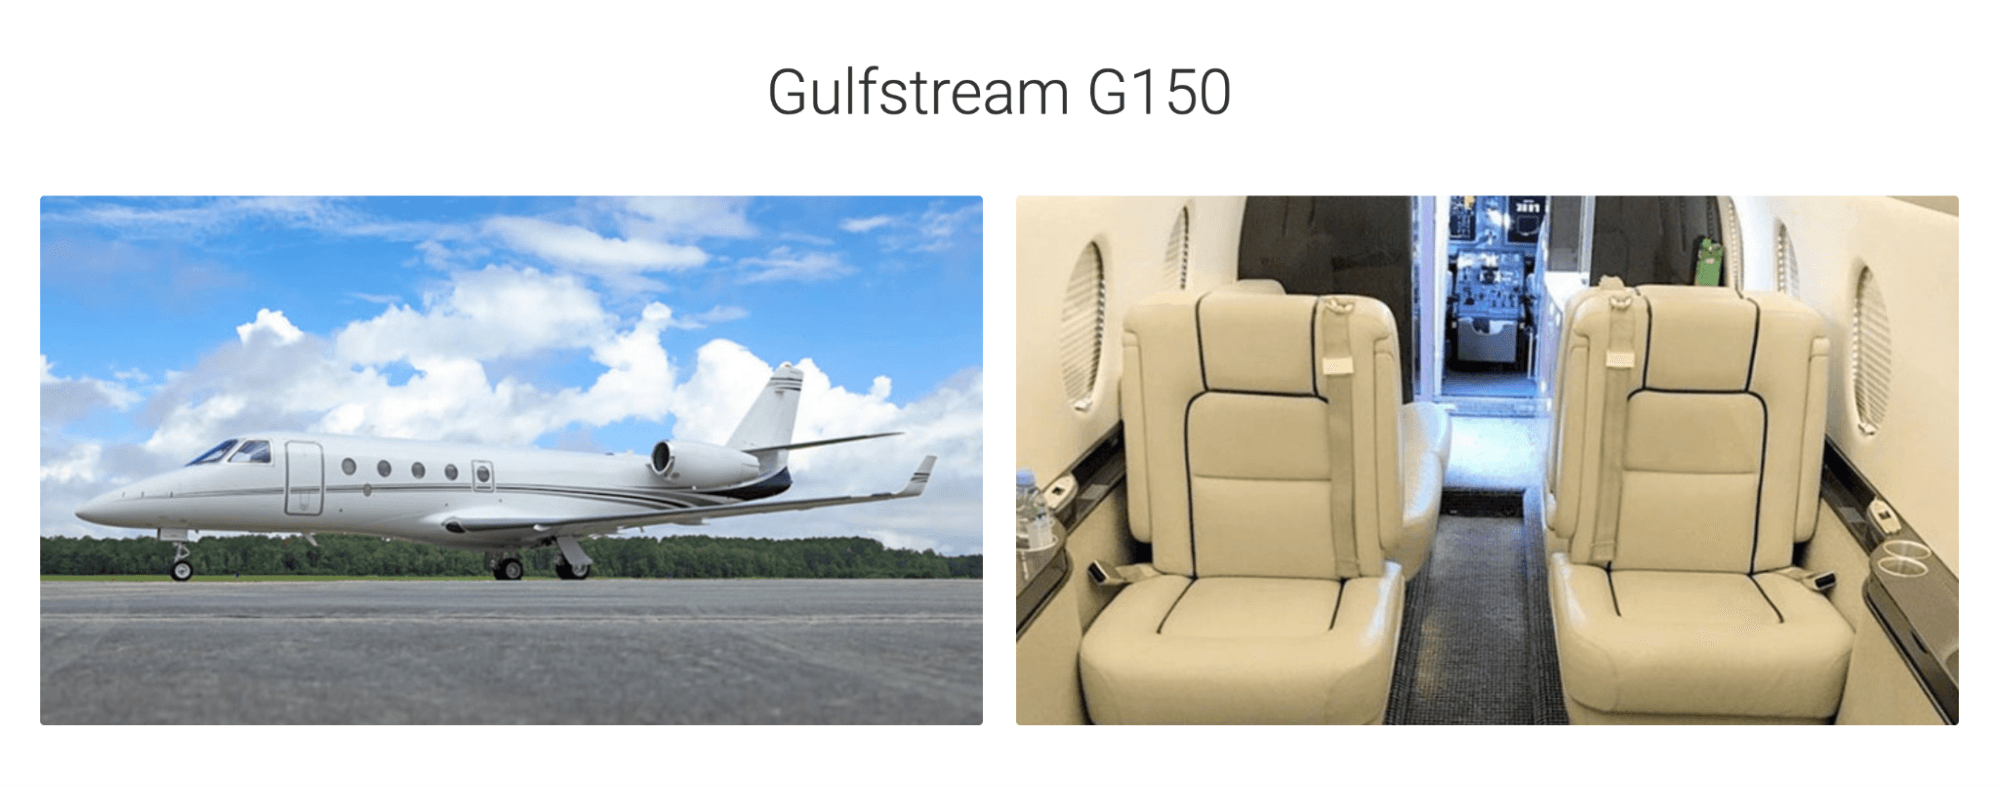 The picture shows the interior and exterior of Gulfstream G150 jets available from JetOptions.